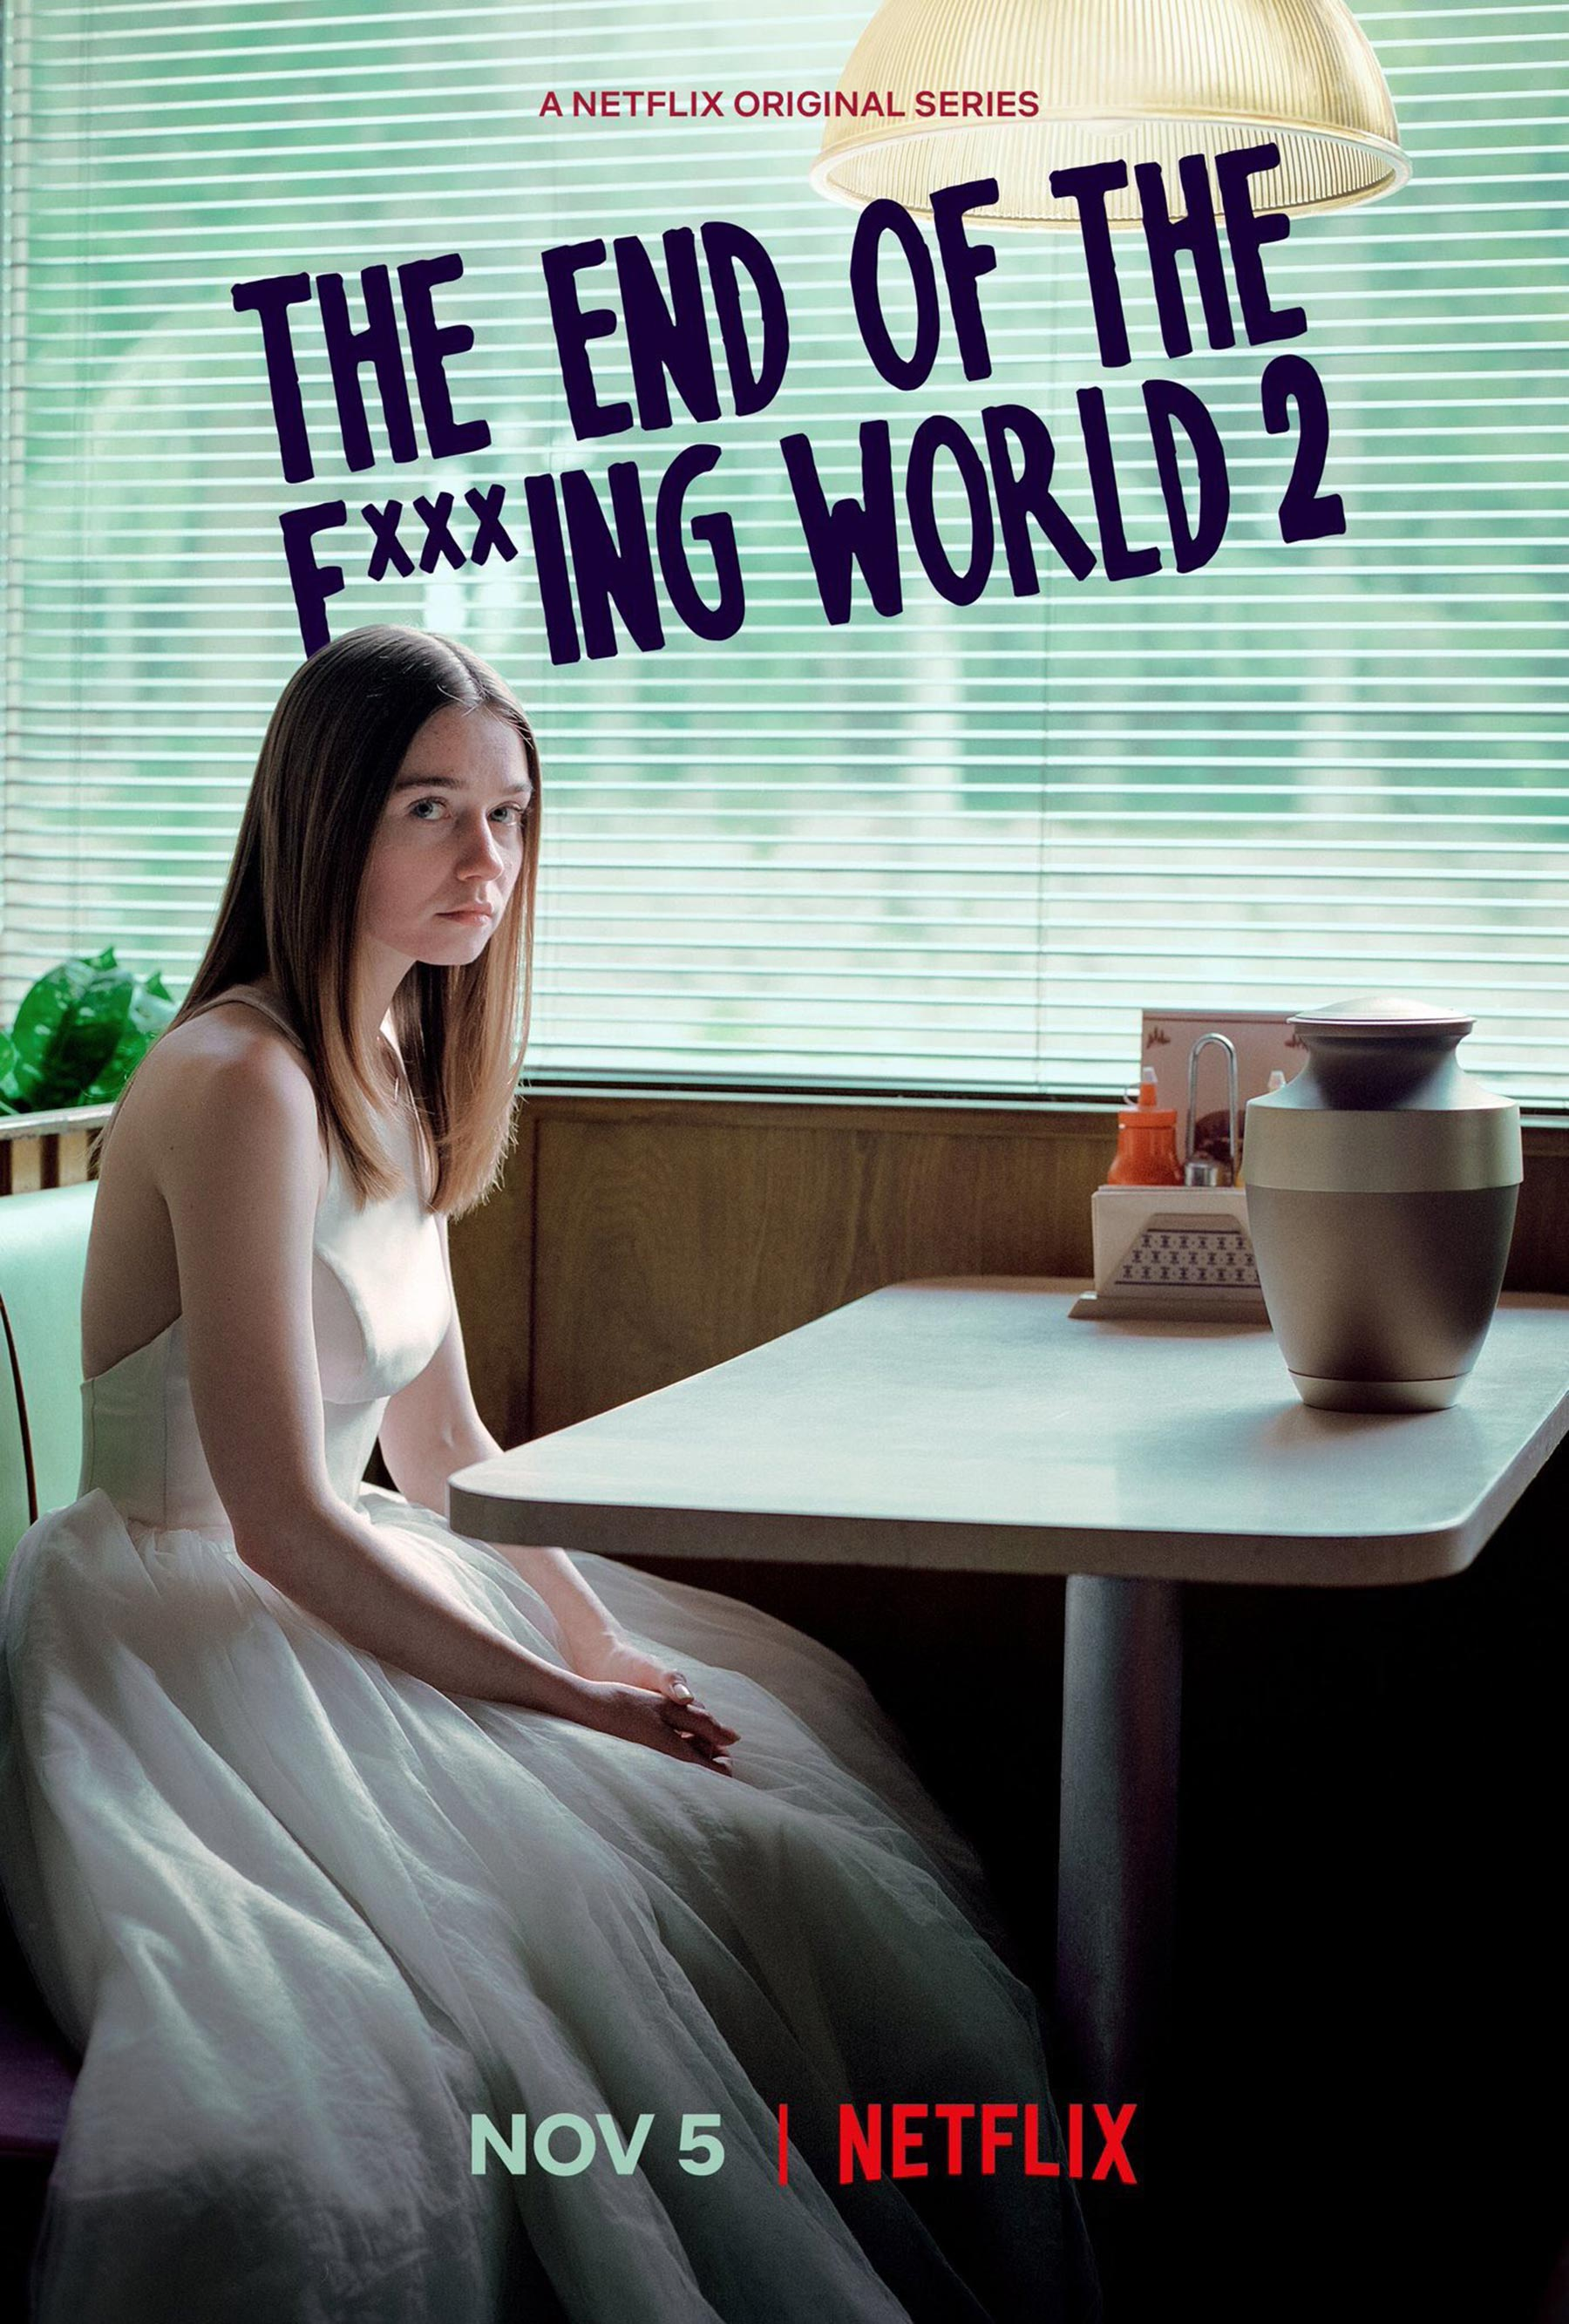 The End of The F***ing World 2 - Poster